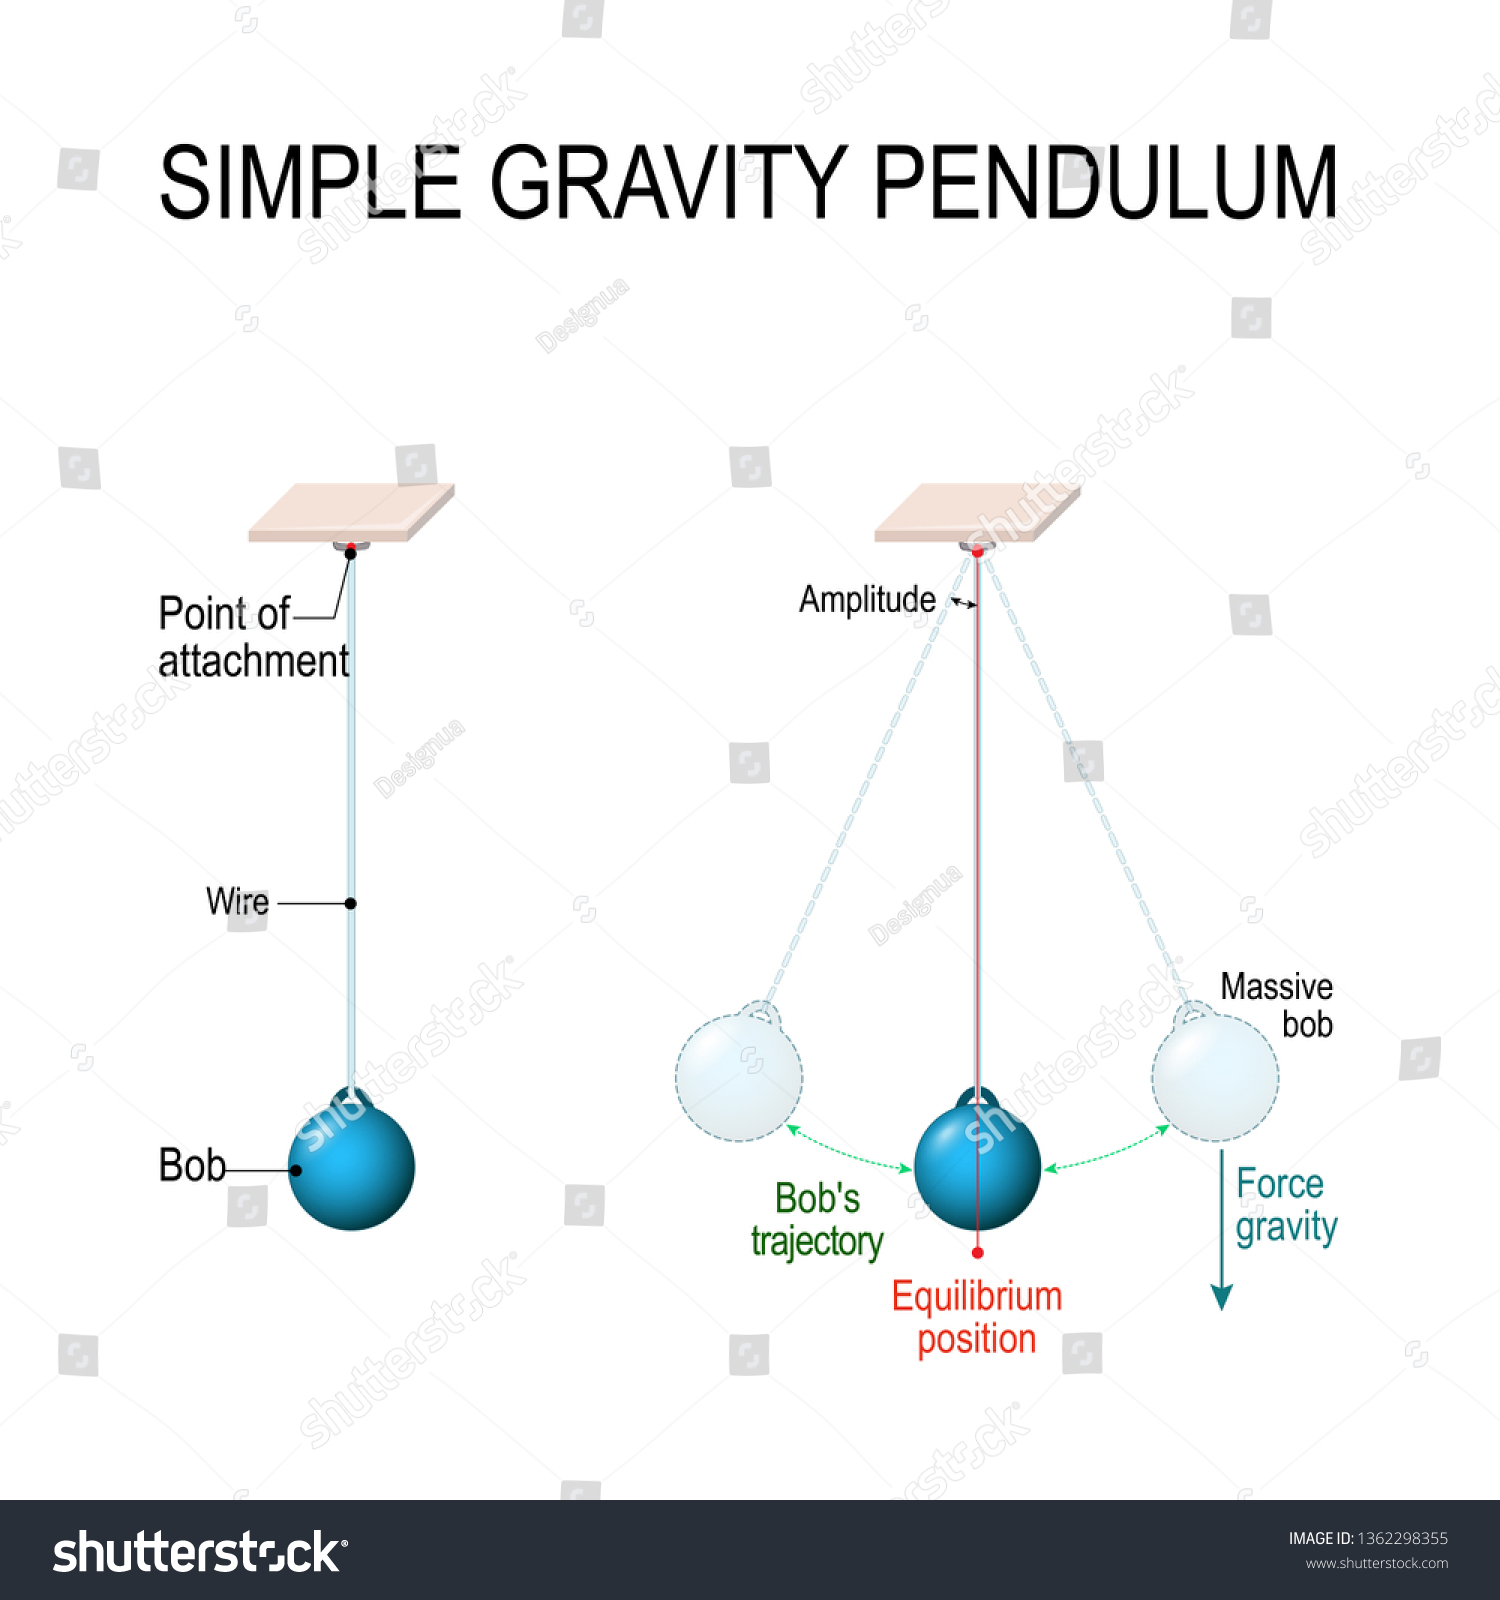 Simple gravity pendulum. Conservation of energy. When pendulum moving towards the mean position the potential energy is converted to kinetic energy. diagram for educational, and science use #1362298355